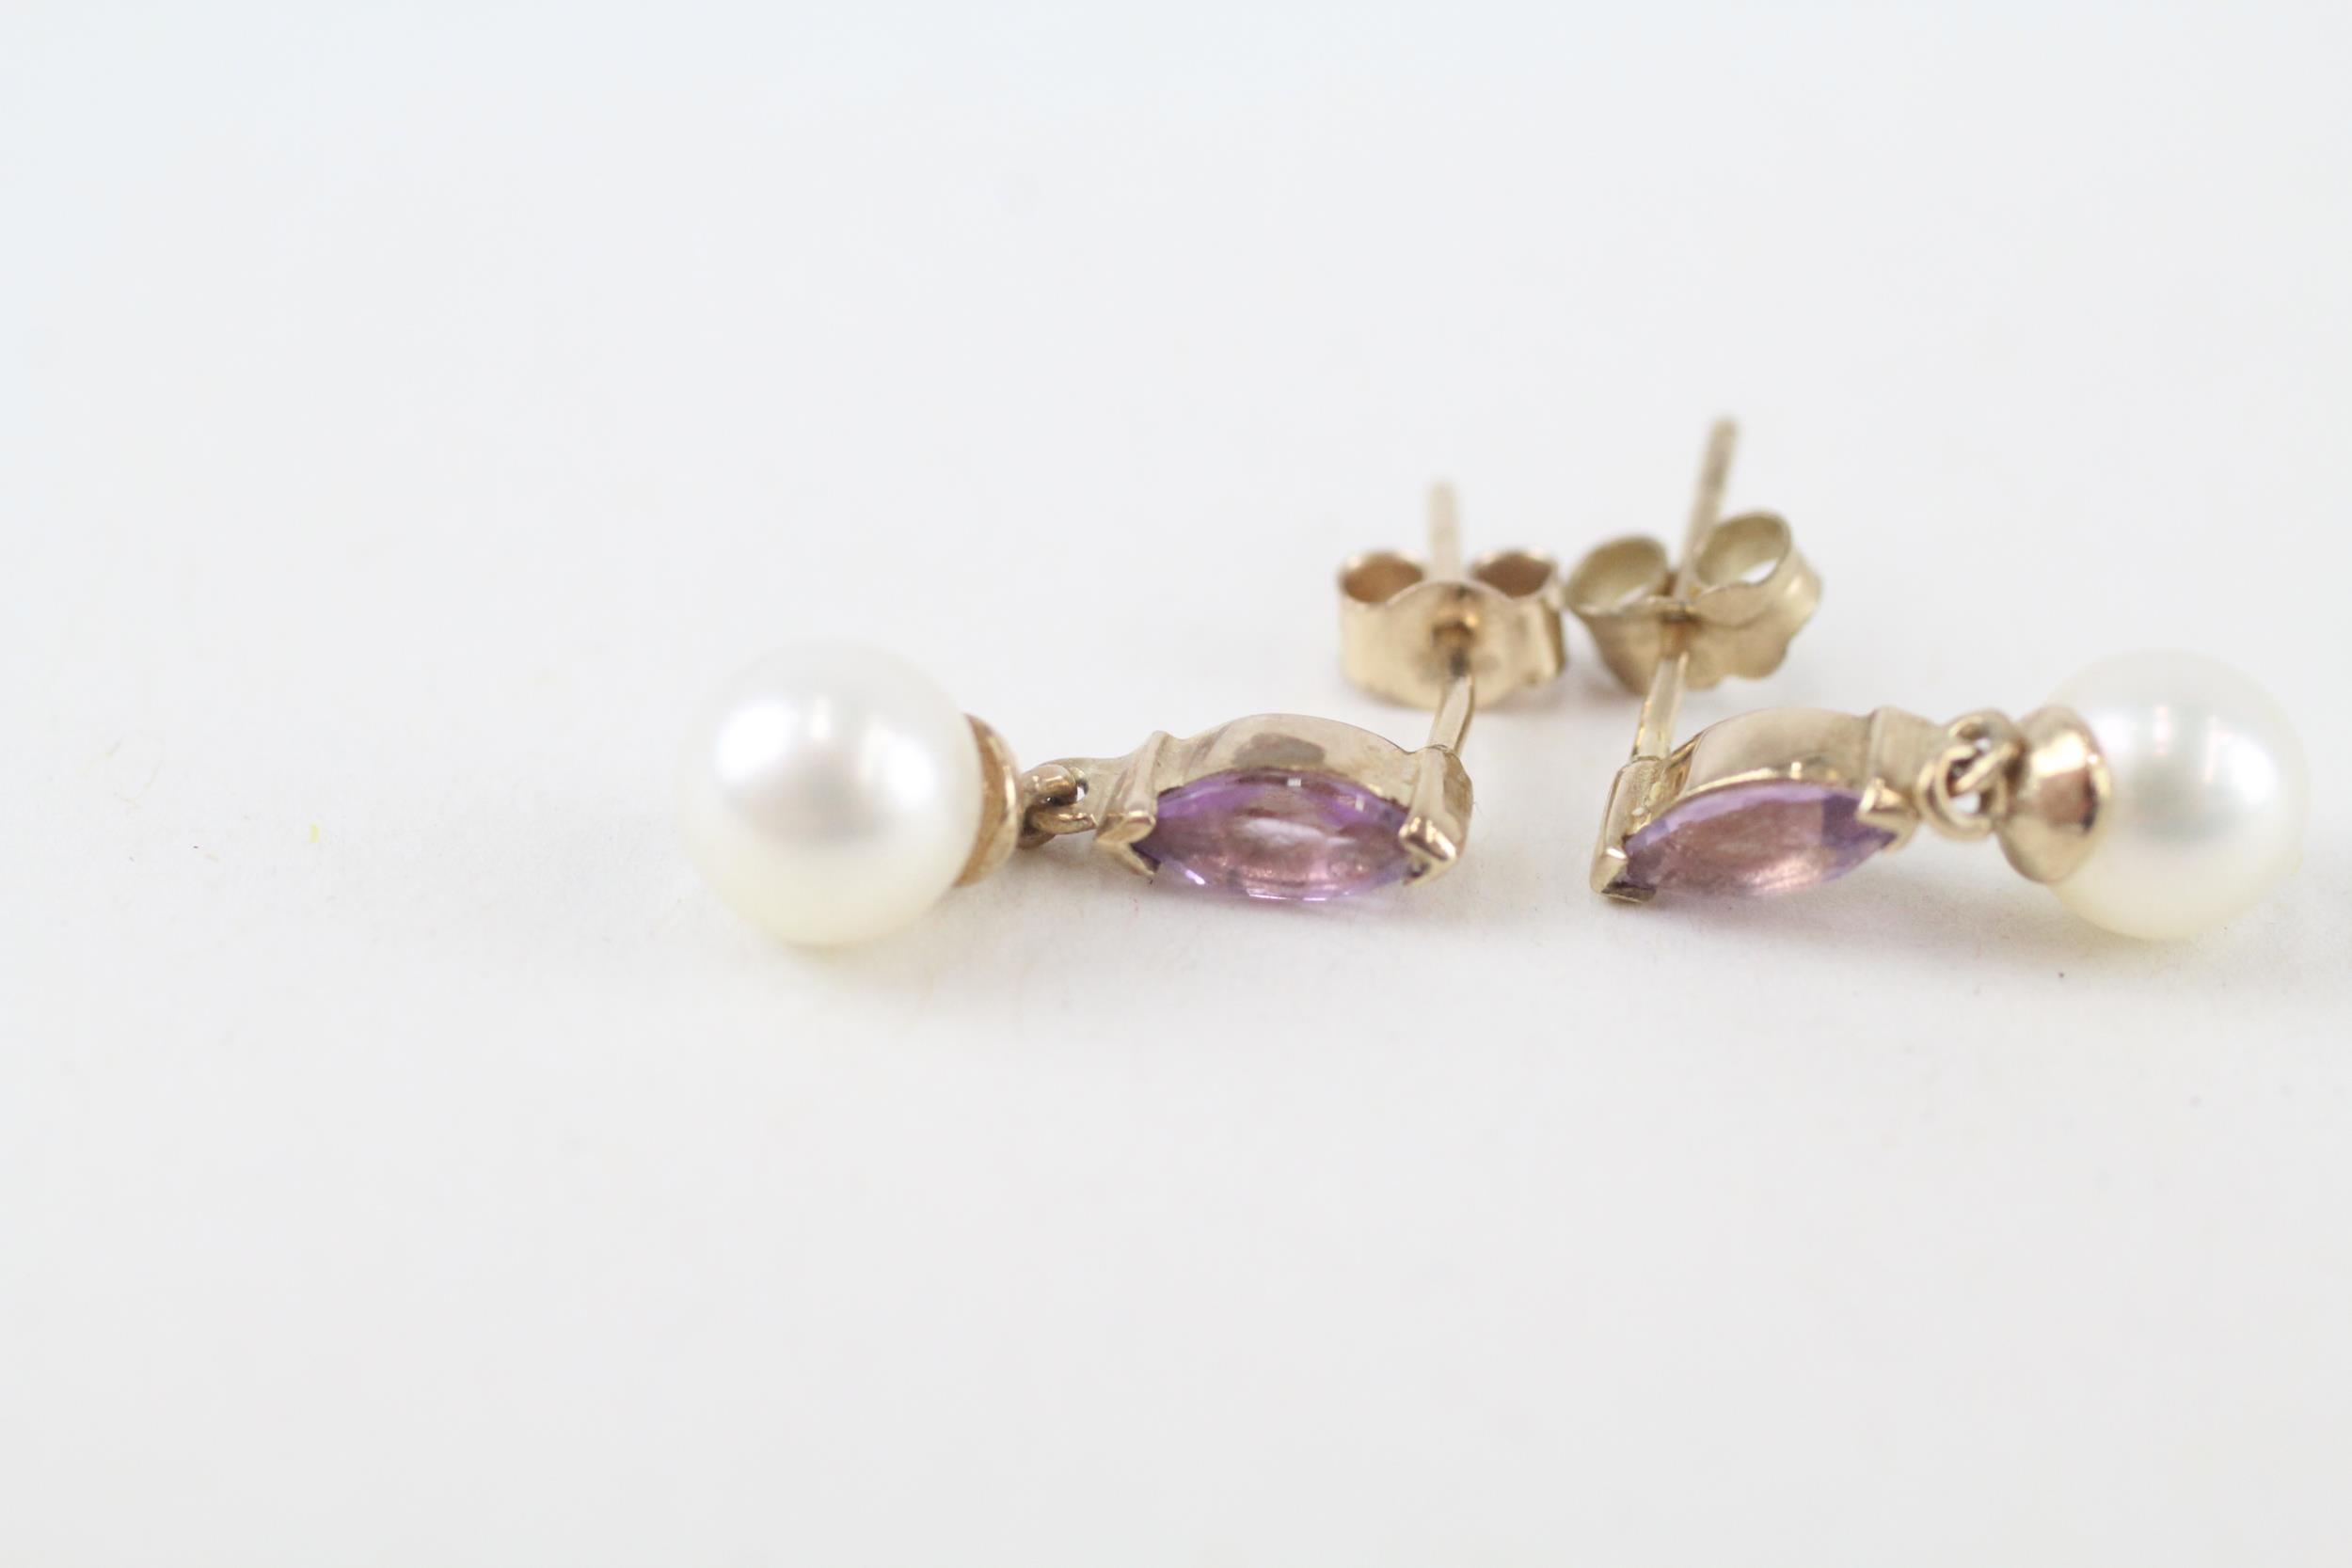 9ct gold marquise cut amethyst & cultured pearl drop earrings (1.4g) - Image 3 of 4